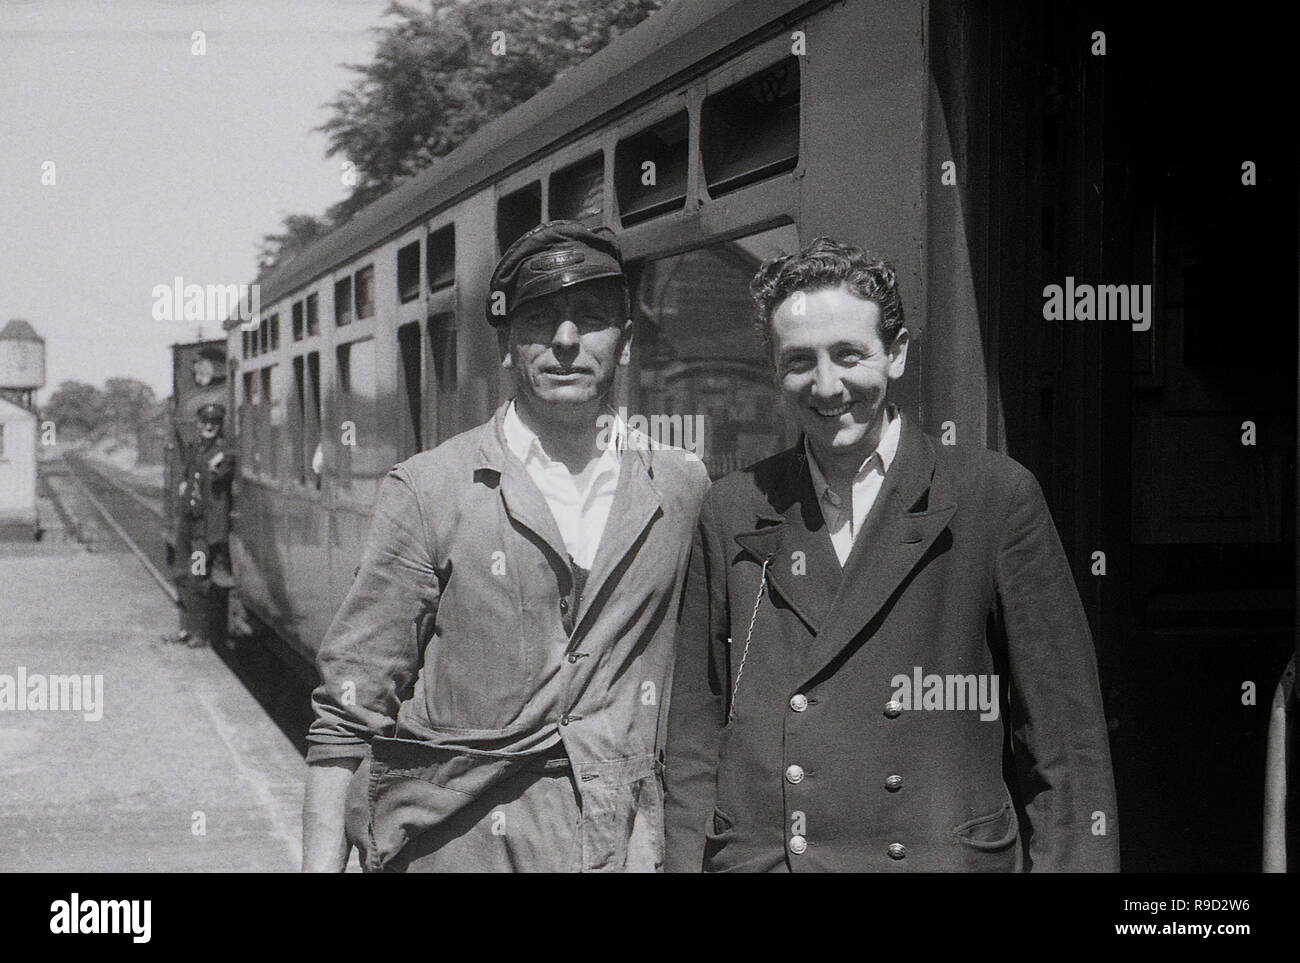 1950s, historical, two British Railways employees, a train driver of a steam locomotive in his cap and a train guard, stand together on a railway platform outside a train carriage, England, UK. British Railways was the state-owned company that operated overground rail transport from 1948 until 1997. In 1965 it became known as British Rail. Stock Photo